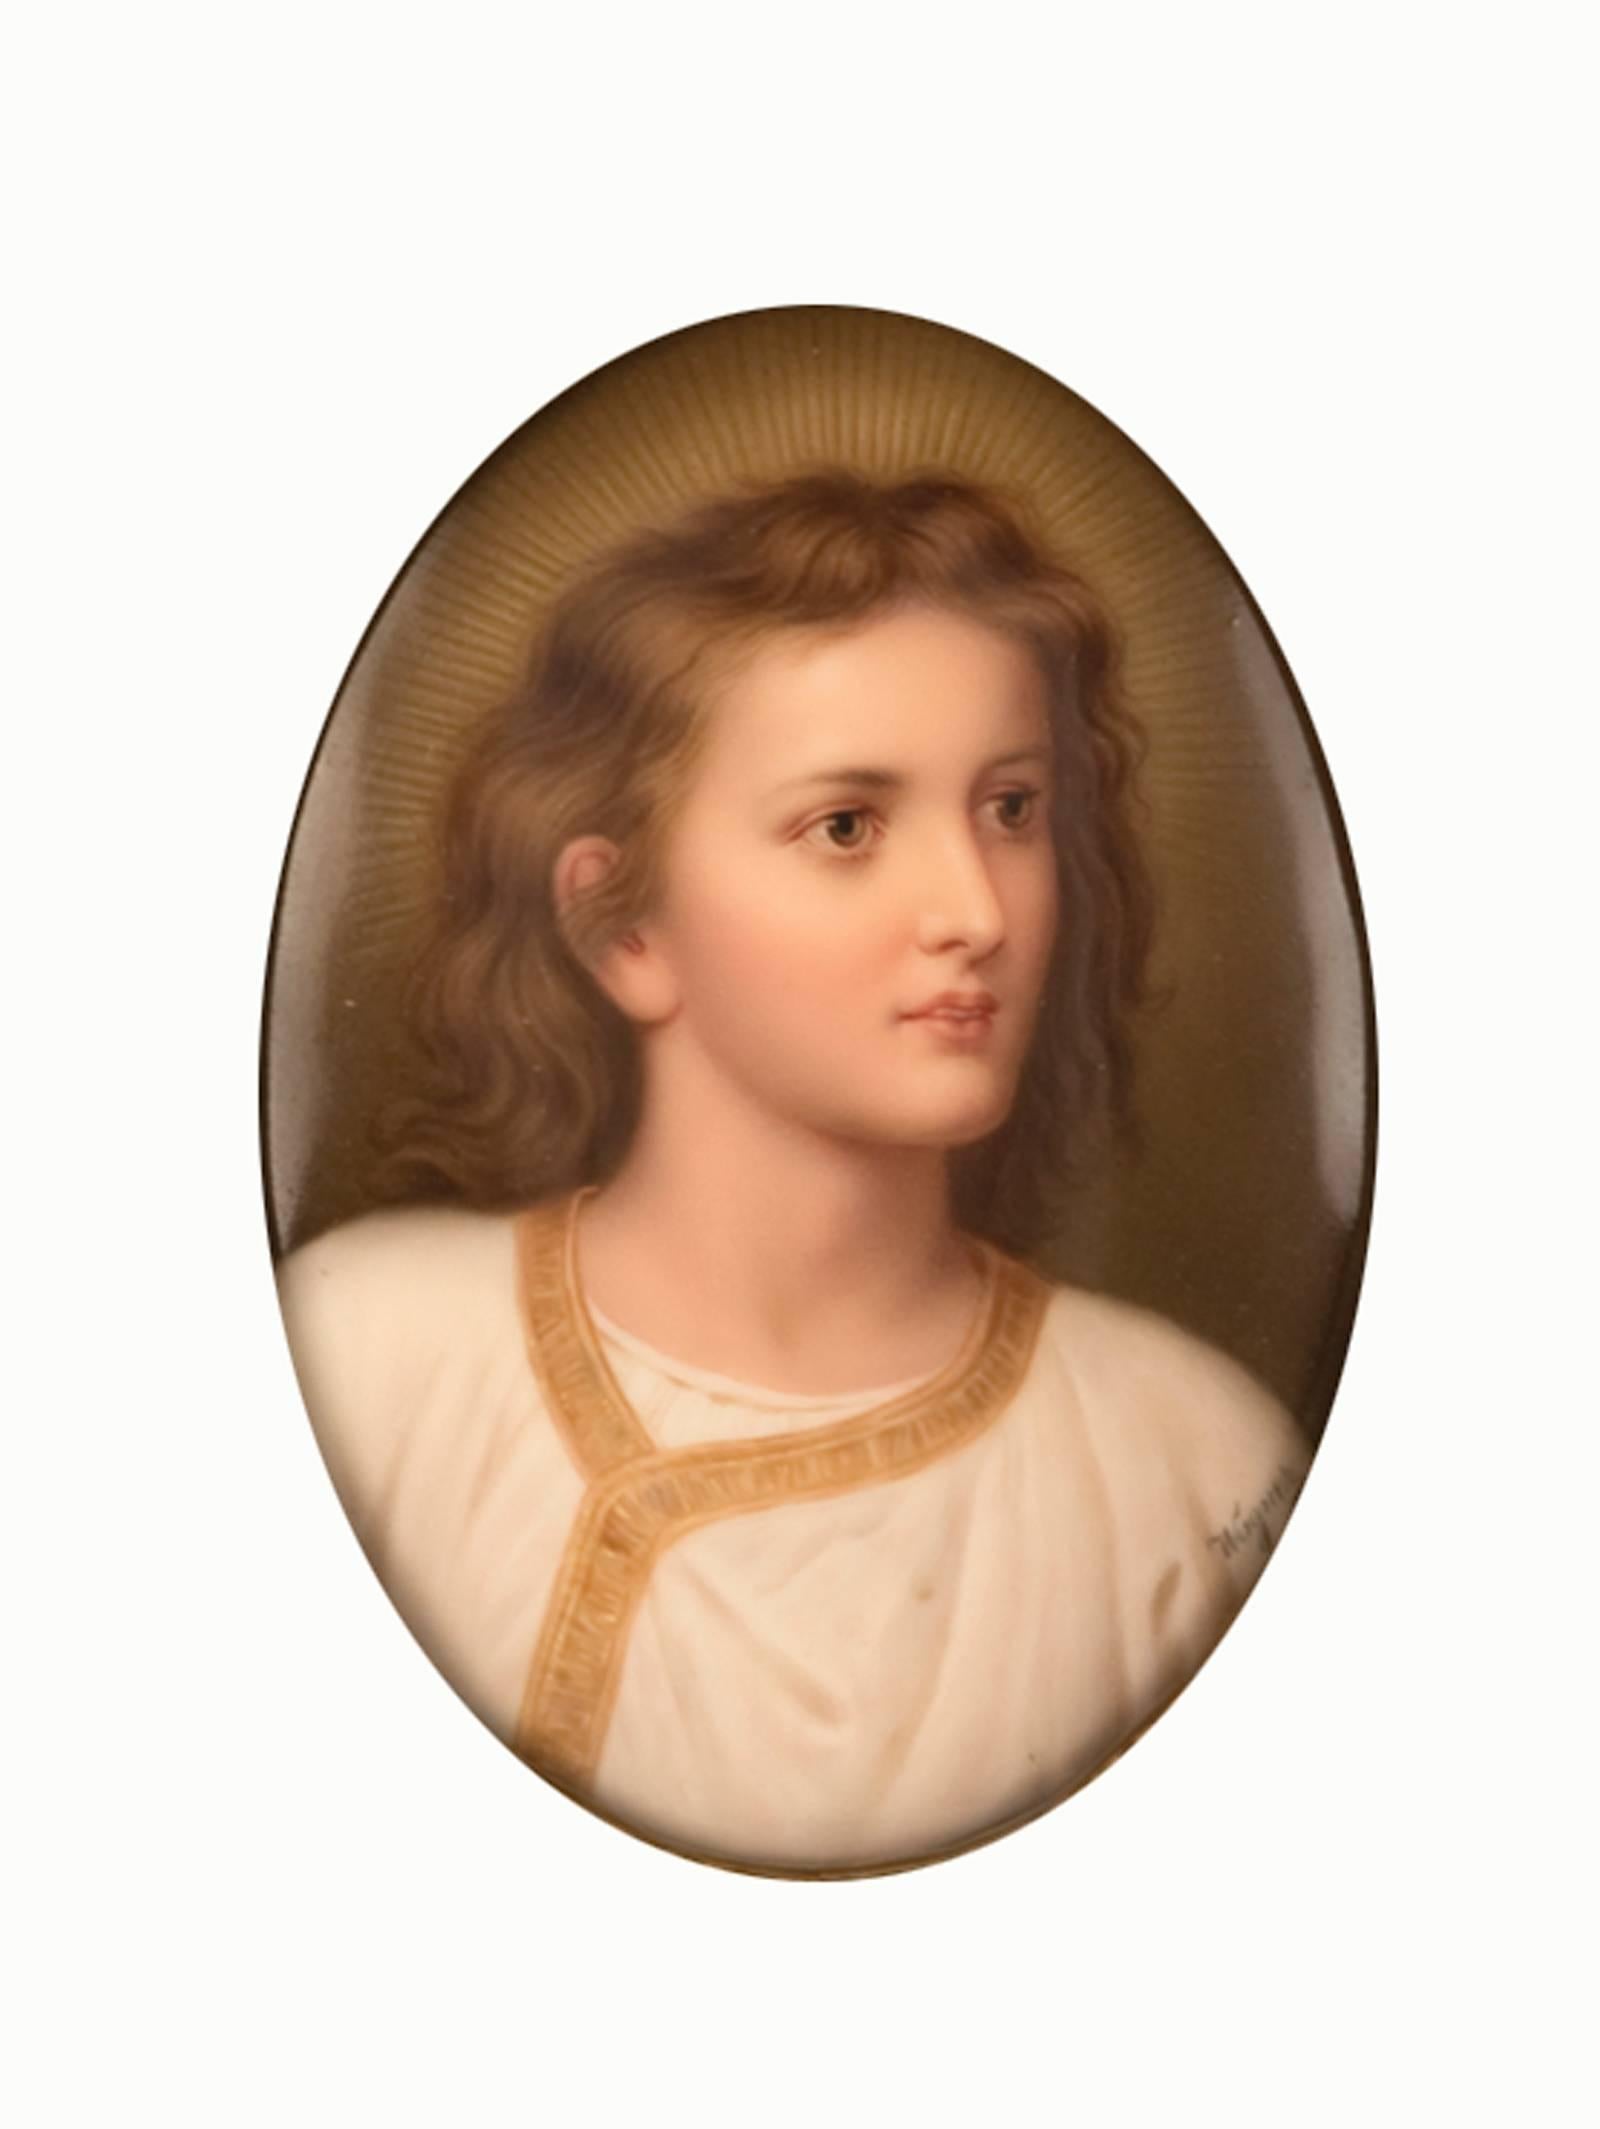 
This ethereal portrait of a Christ as a young boy is hand-painted on an oval-shaped porcelain plaque that sits within an elaborate rectangular carved and giltwood frame. This KMP plaque is after Heinrich Hofmann’s 1881 painting “Jesus in the